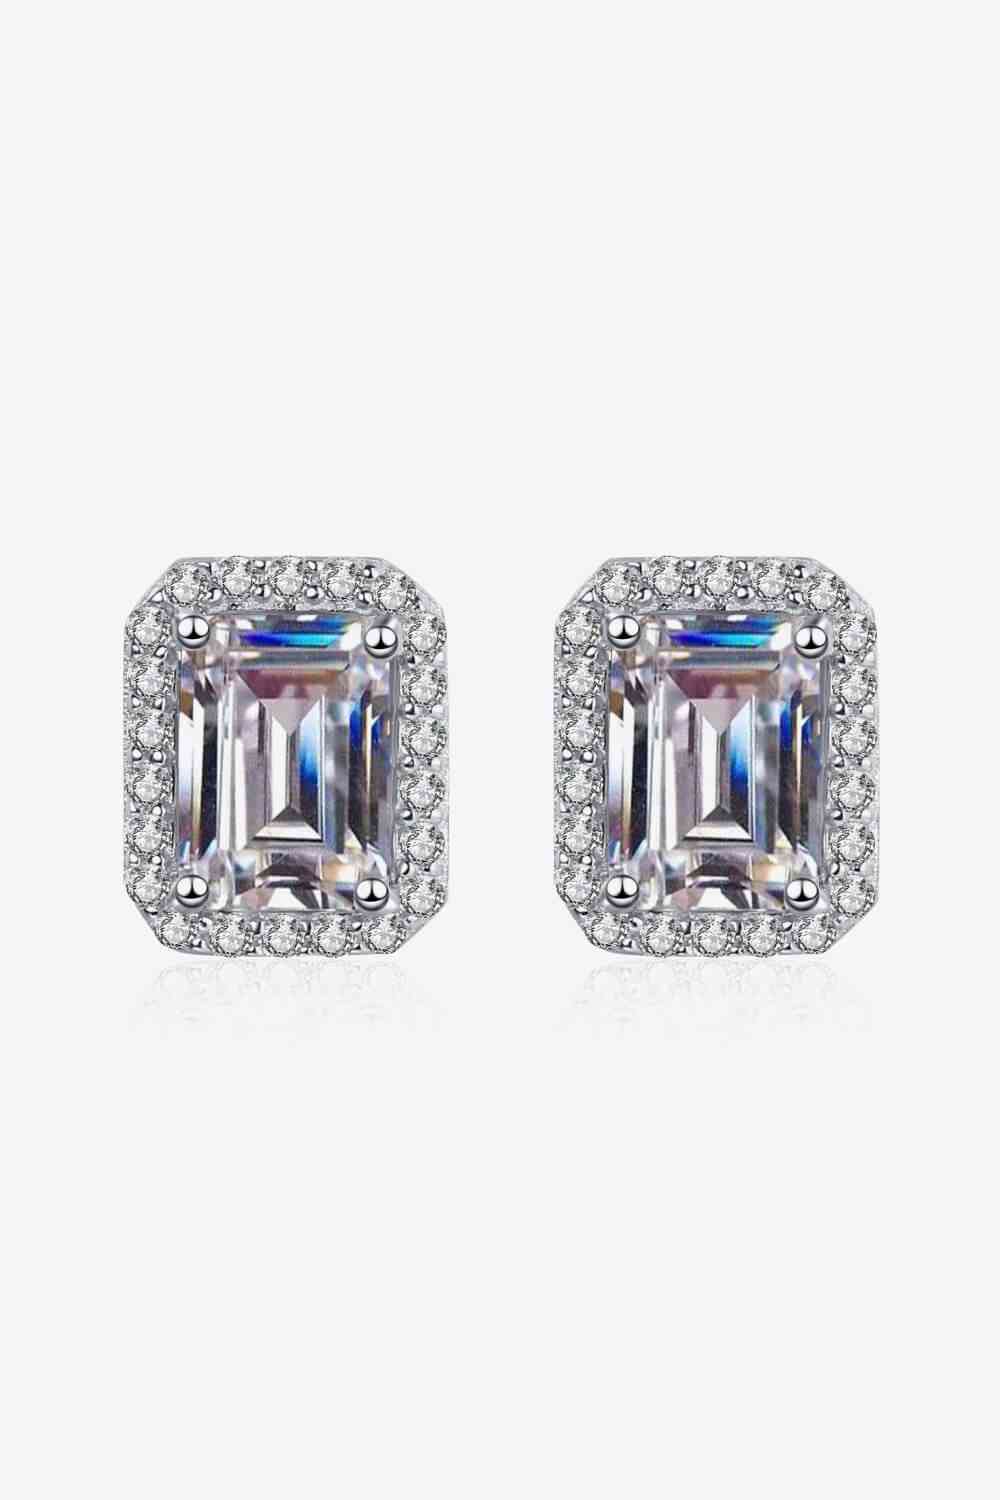 Adored 1 Carat Moissanite Rhodium-Plated Square Stud Earrings - lolaluxeshop